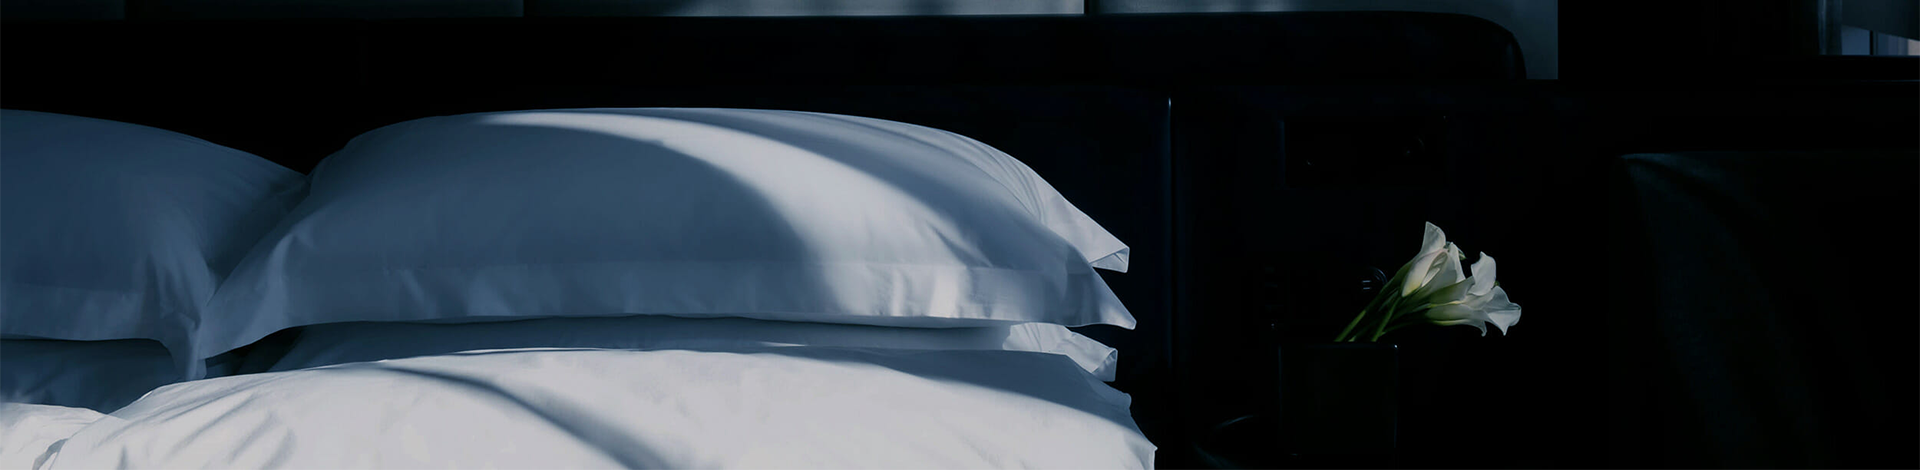 Two pillows in hotel bed